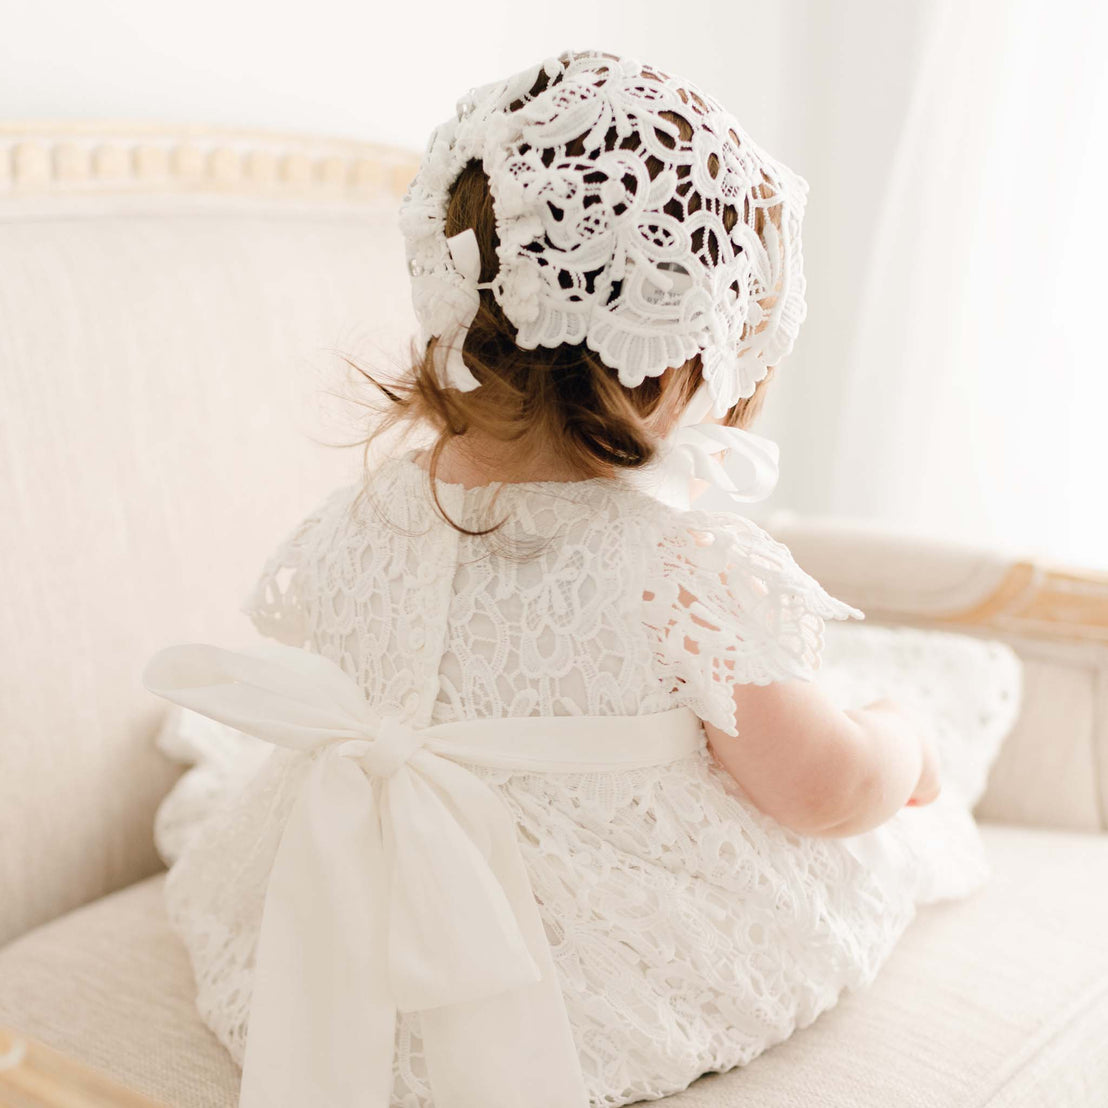 Detail of the back of the Lola Christening Gown and Bonnet. The gown is worn by a baby girl and the detail shows the ties in back with a cotton sash and button closure.